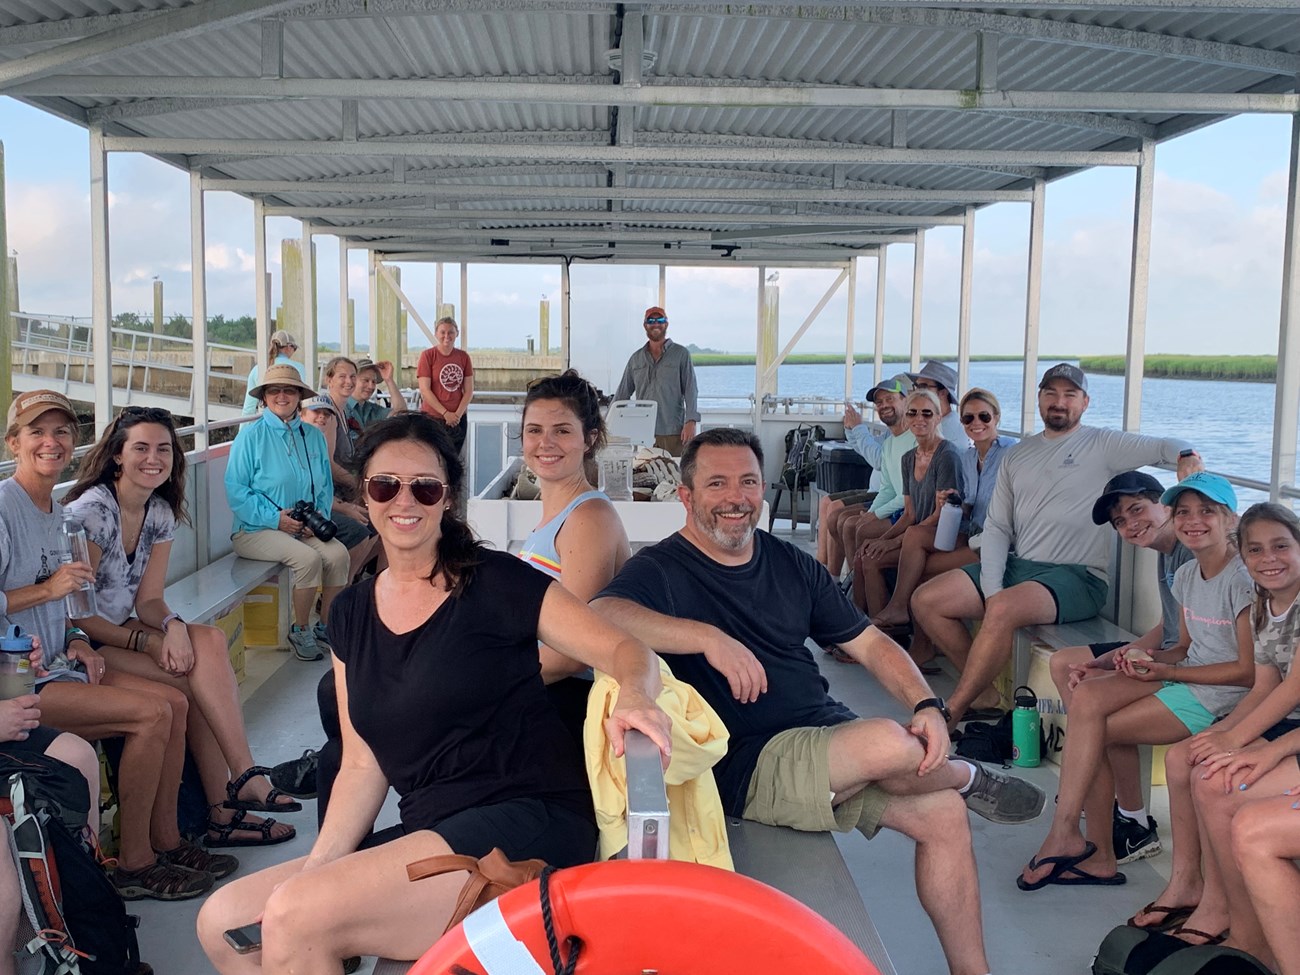 People seated on a small ferry boat pose for group photo. Ferry is moving across water below bright sky with a bit of marshland to right in background.